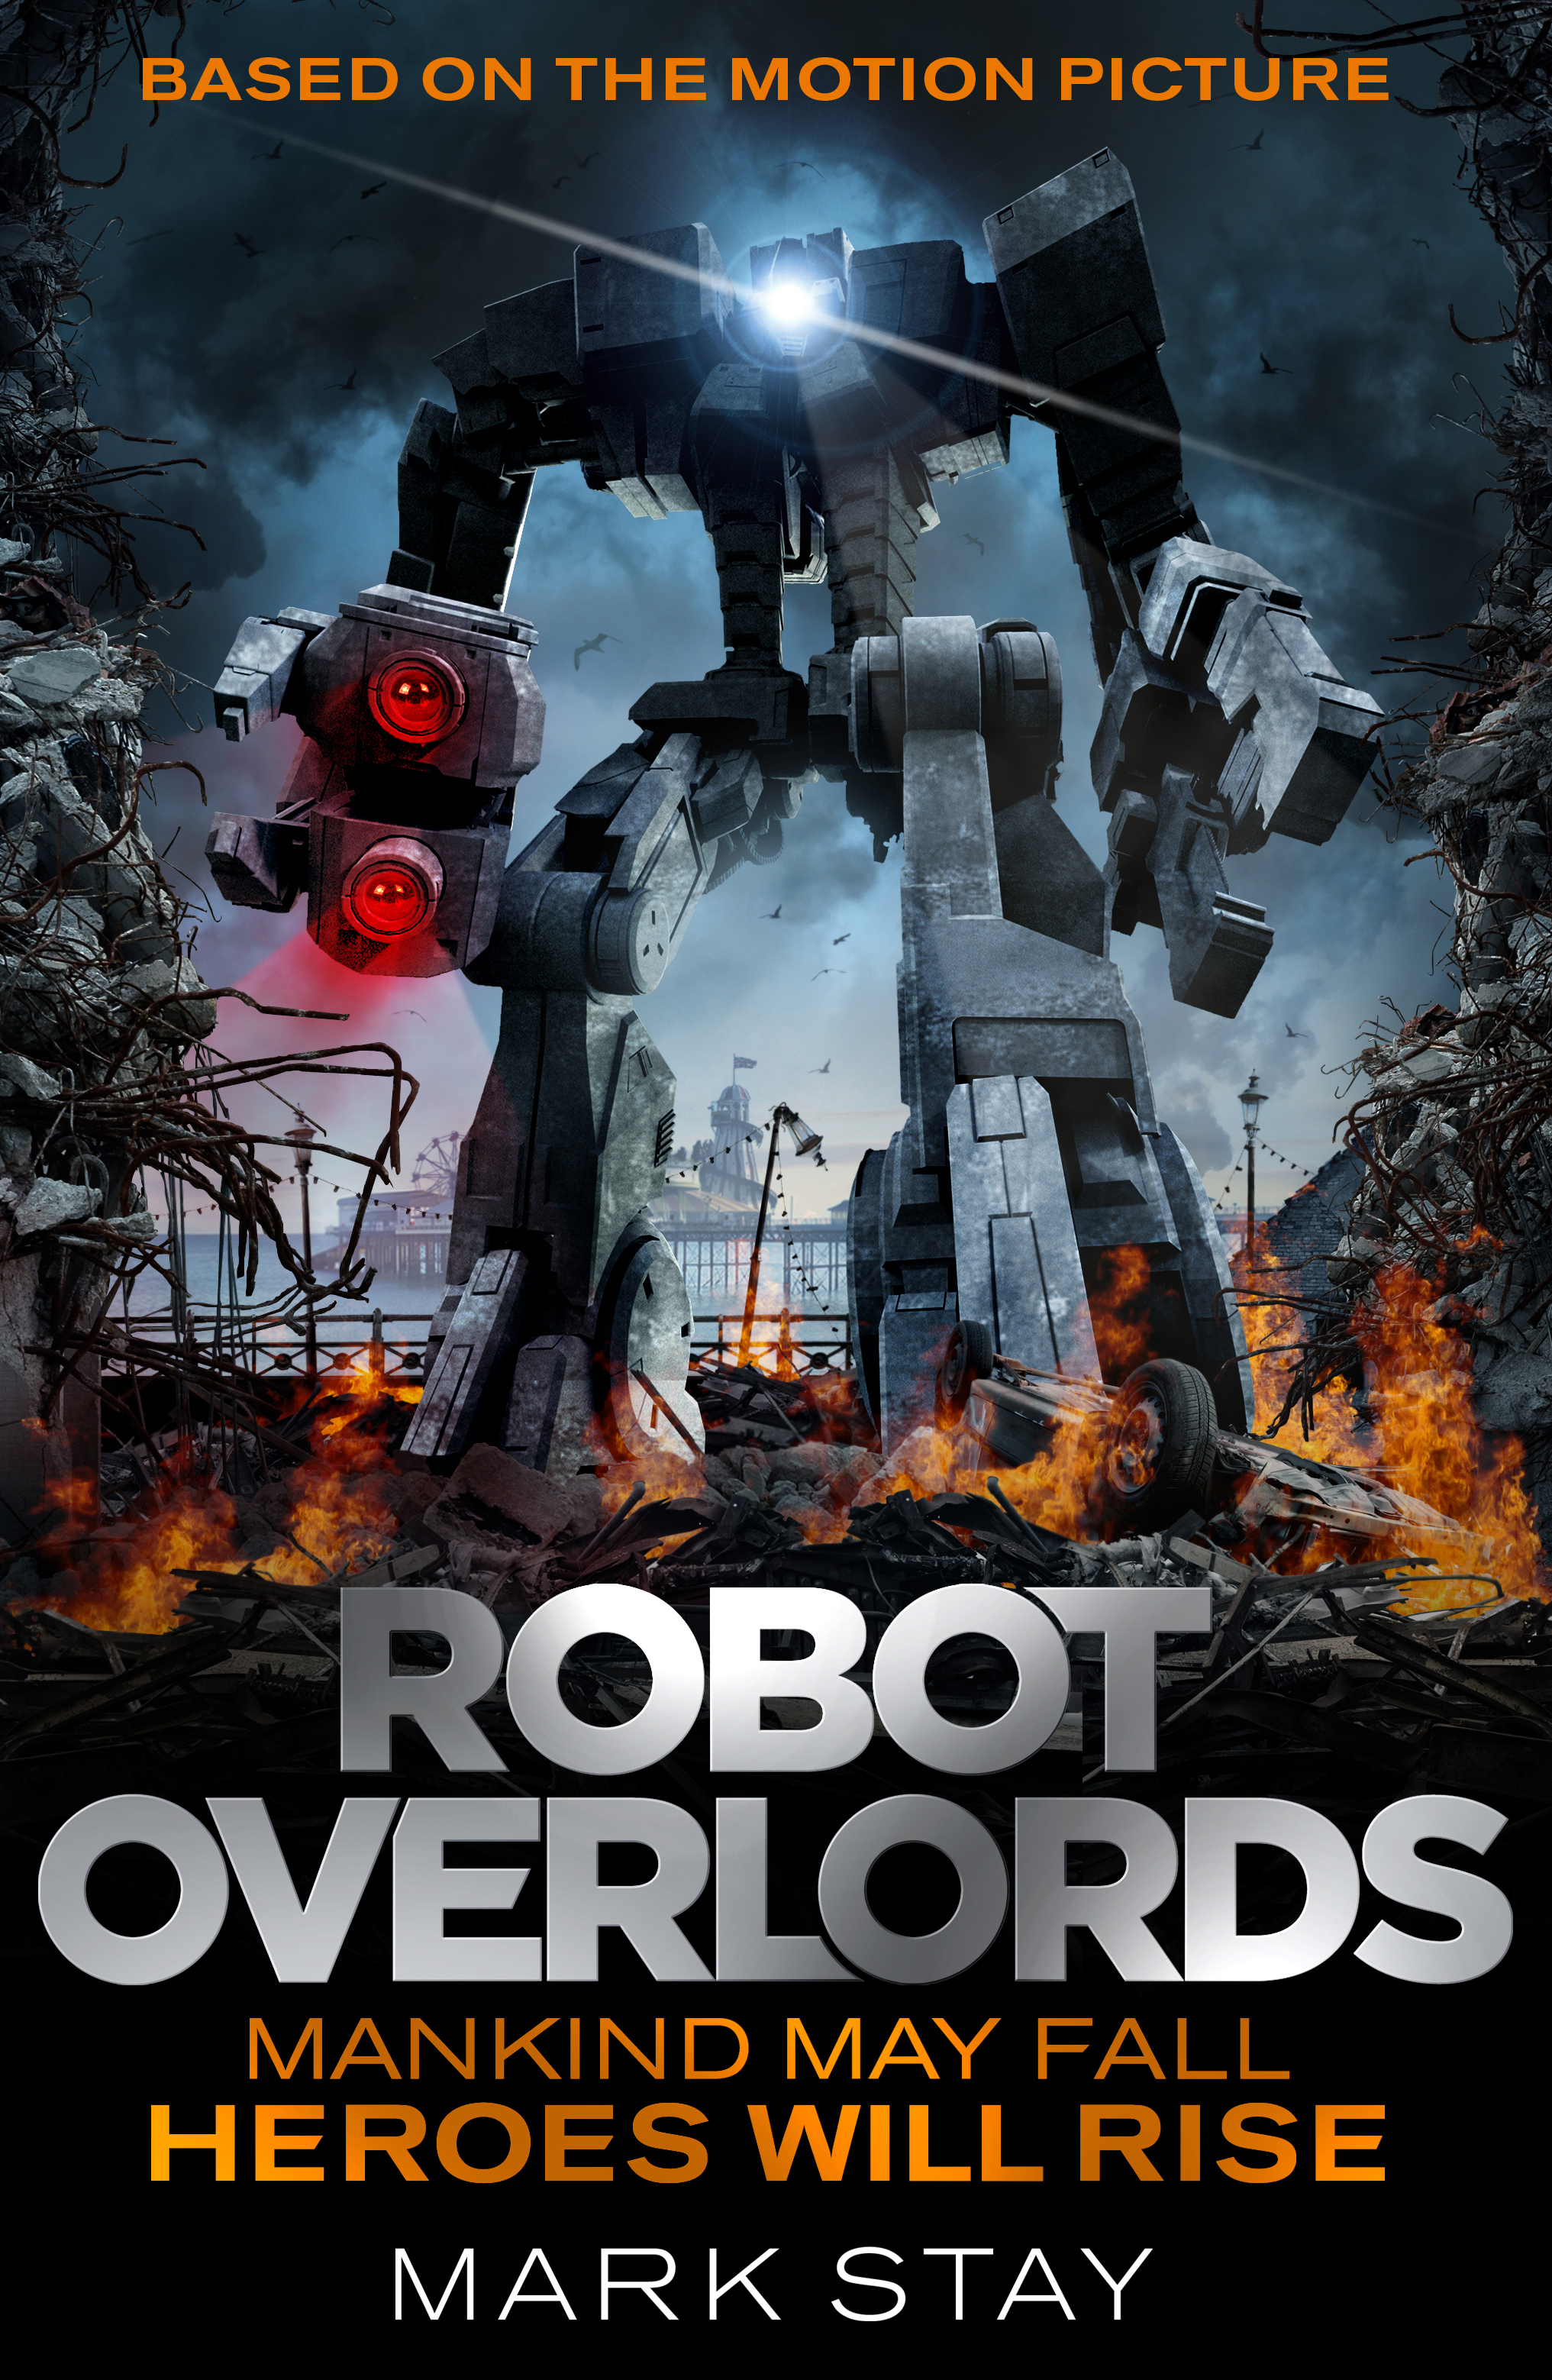 Robot Overlords Movie 2014